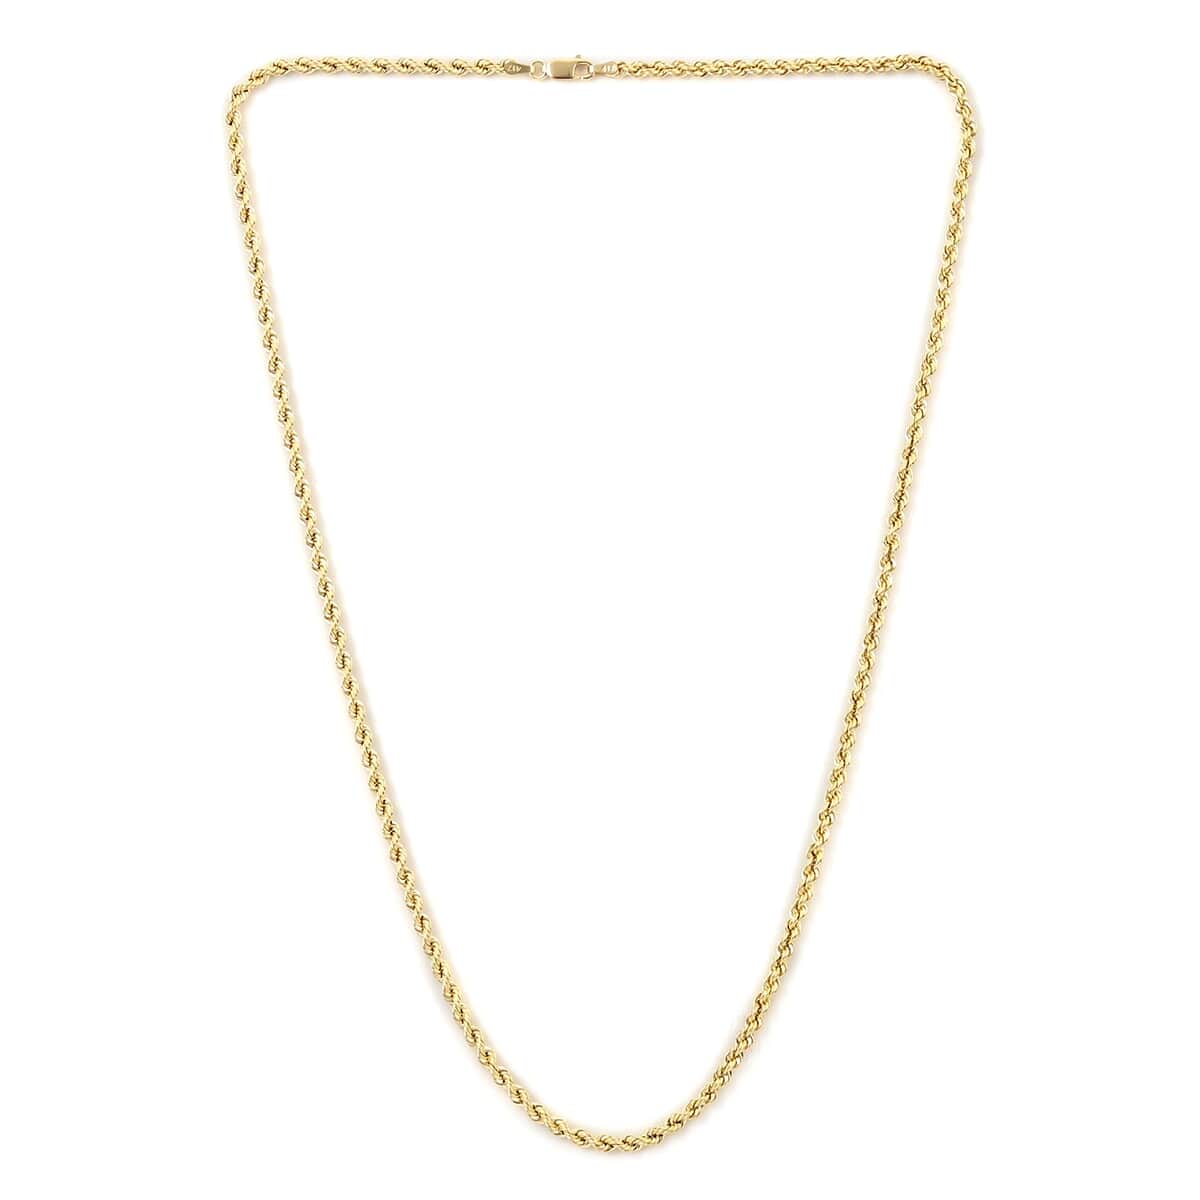 14K Yellow Gold 1.5mm Rope Chain Necklace 18 Inches 1.50 Grams image number 3